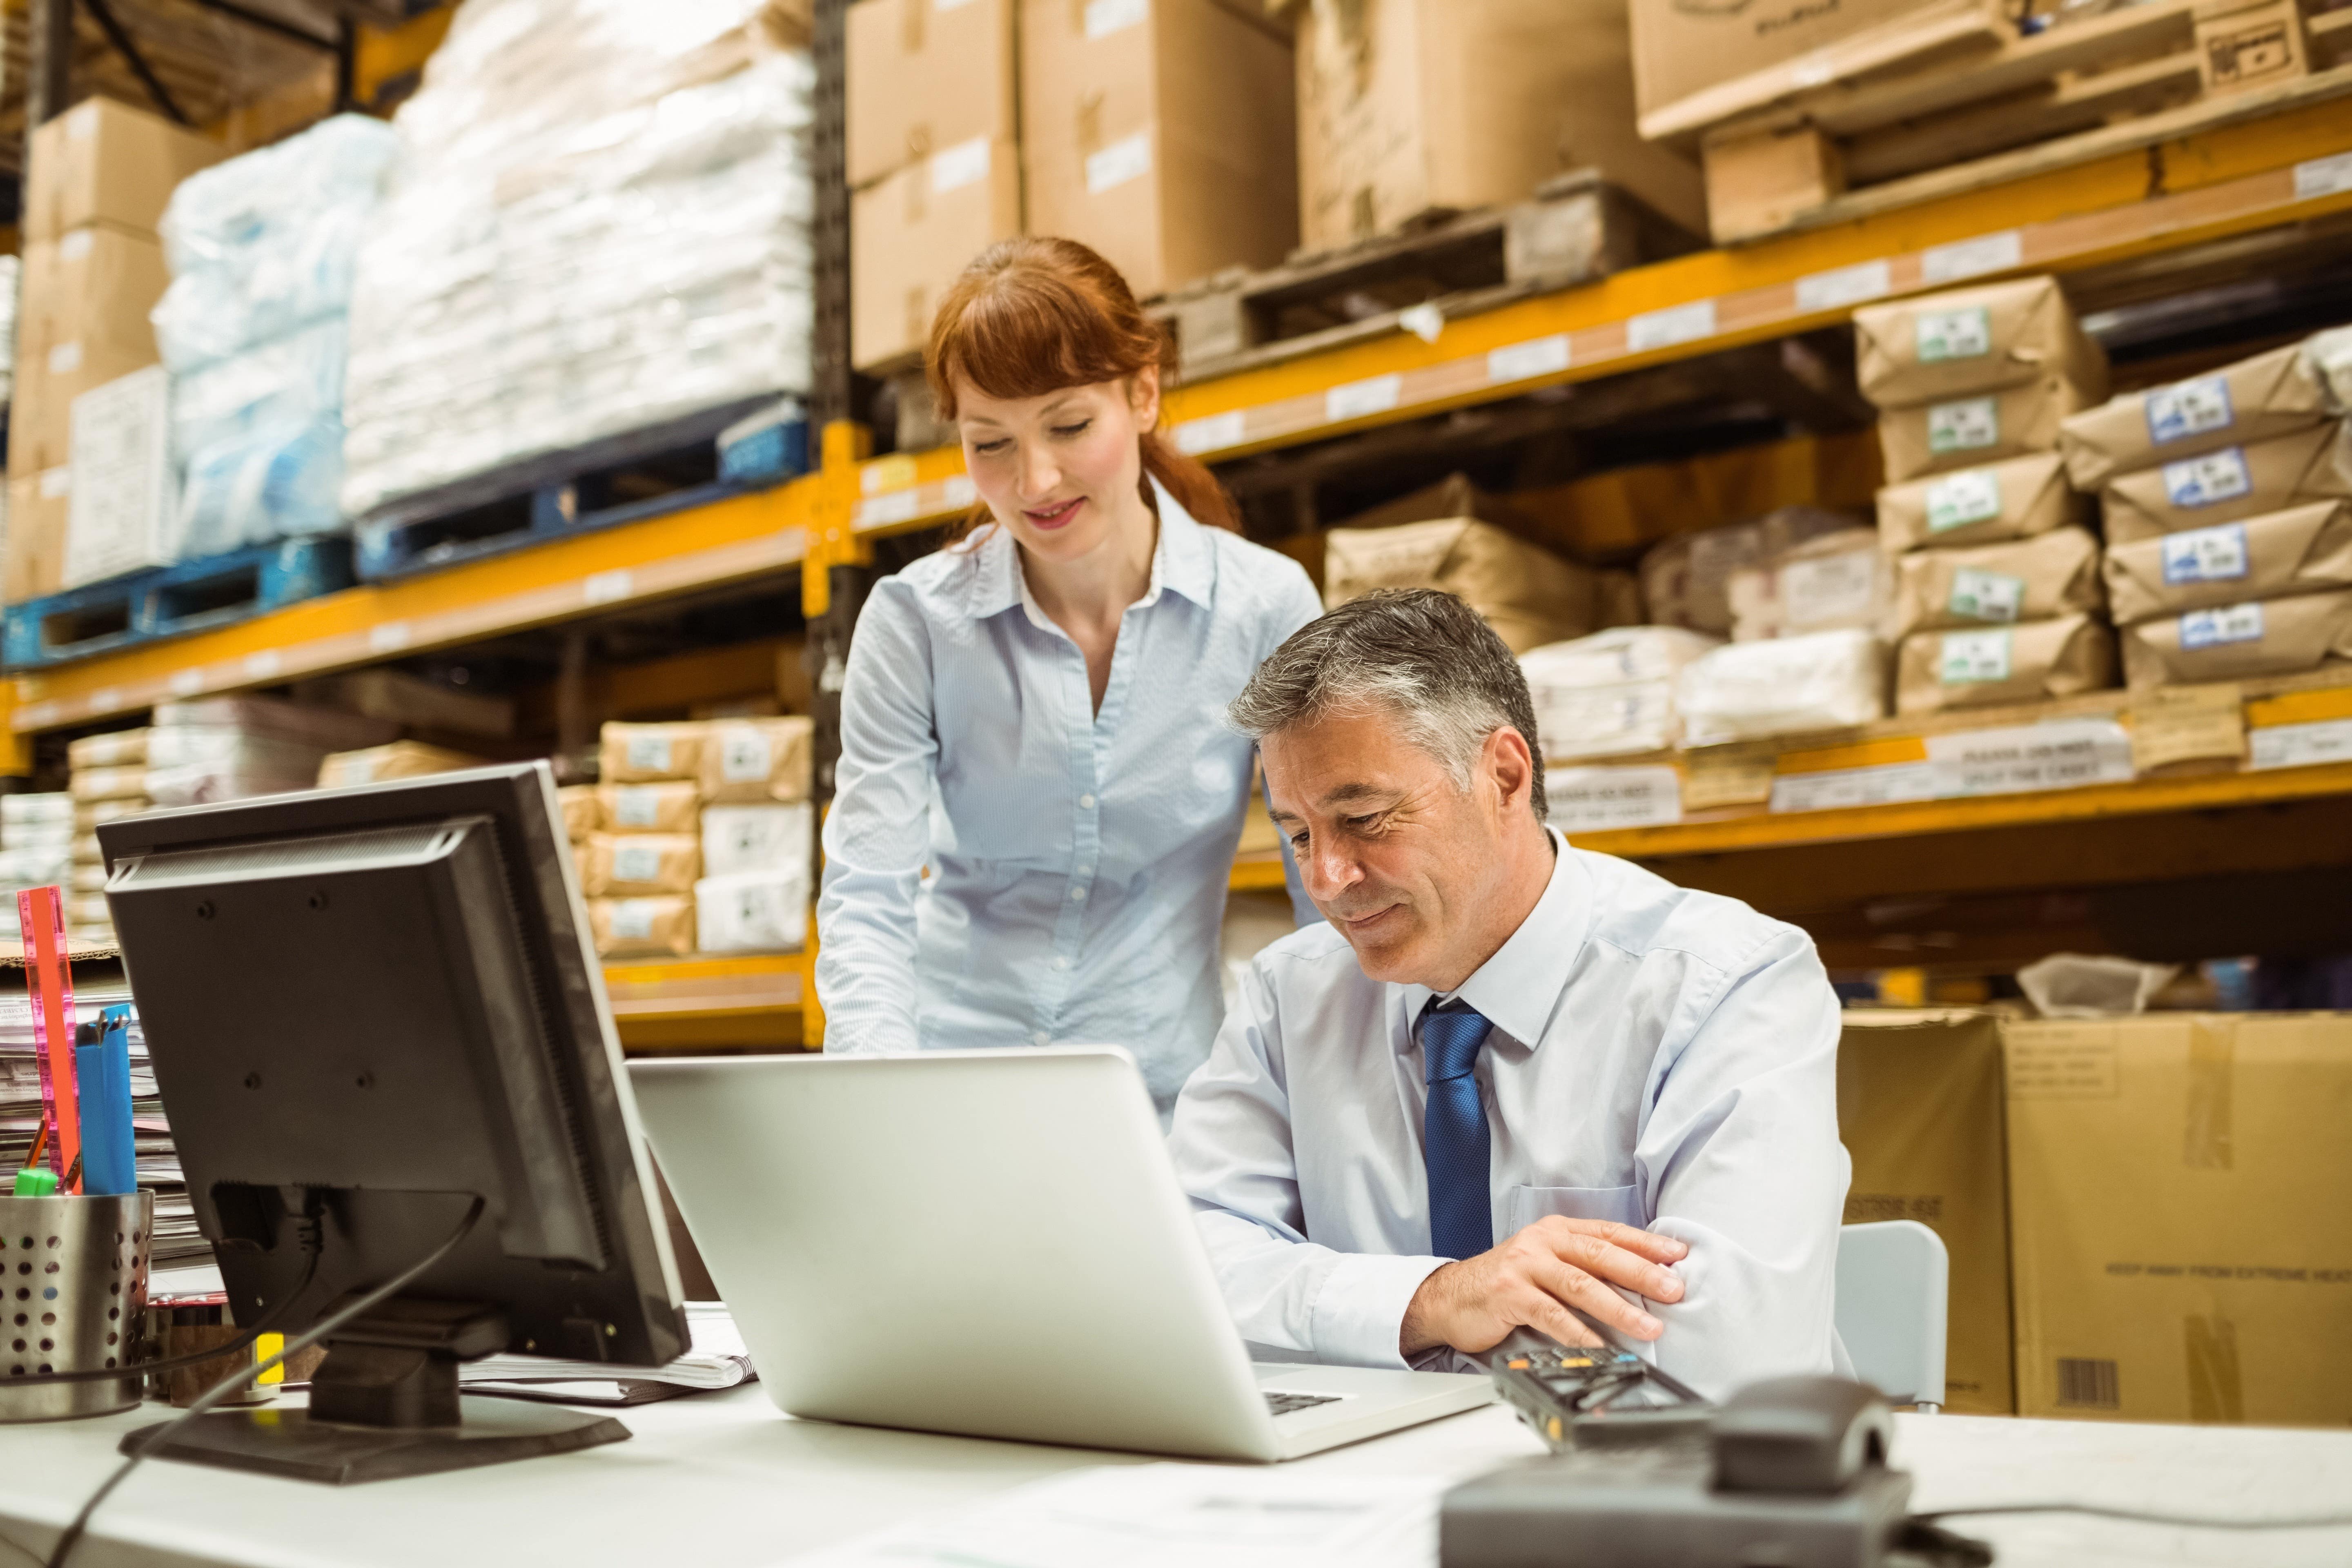 How to Become a Logistics Manager